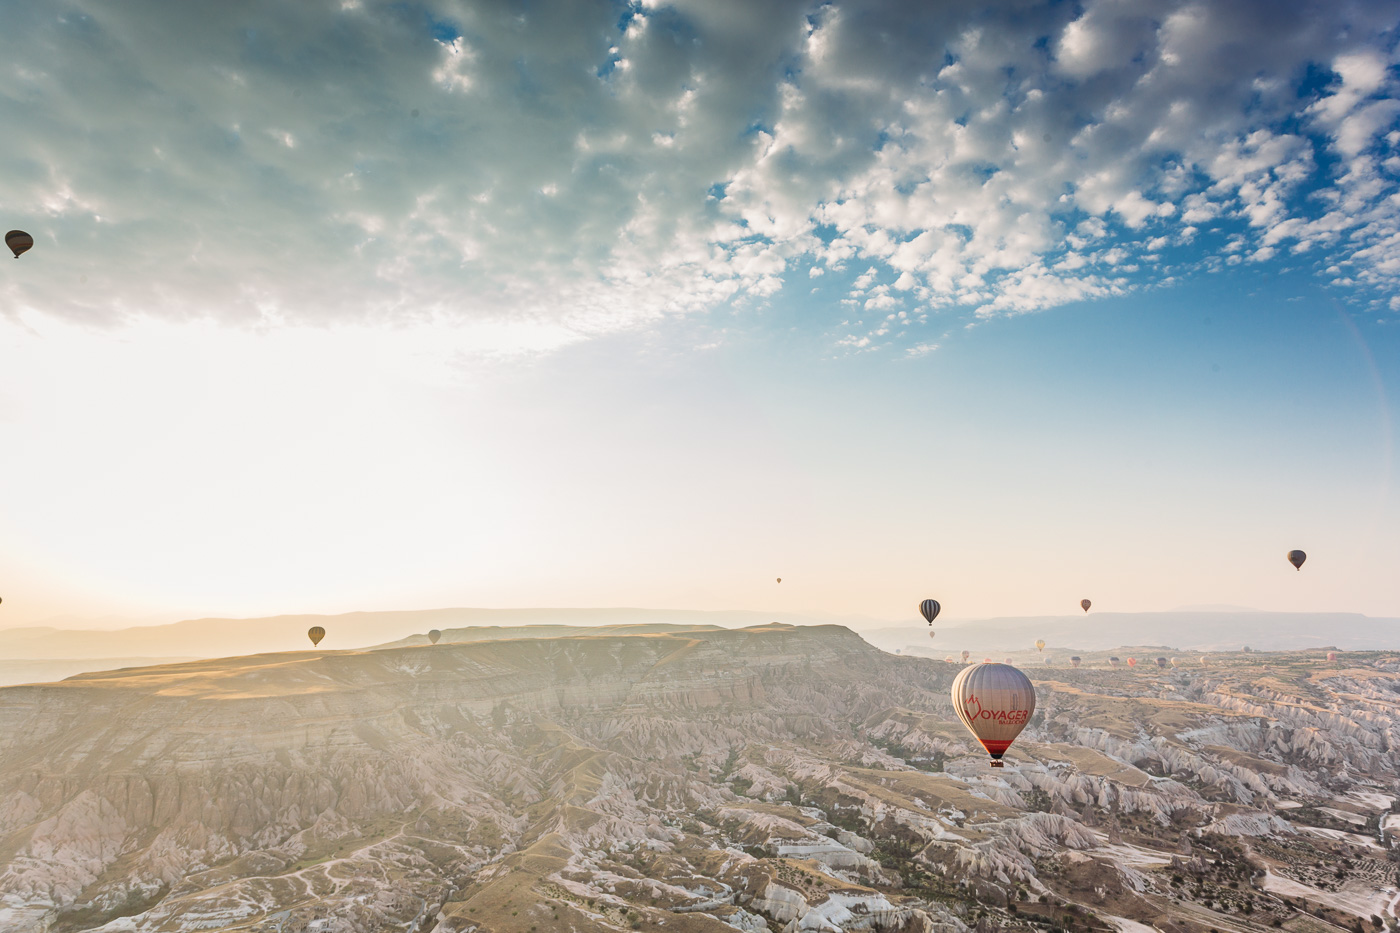 Amazing skies above and rocky landscapes below in our Cappadocia hot air balloon ride